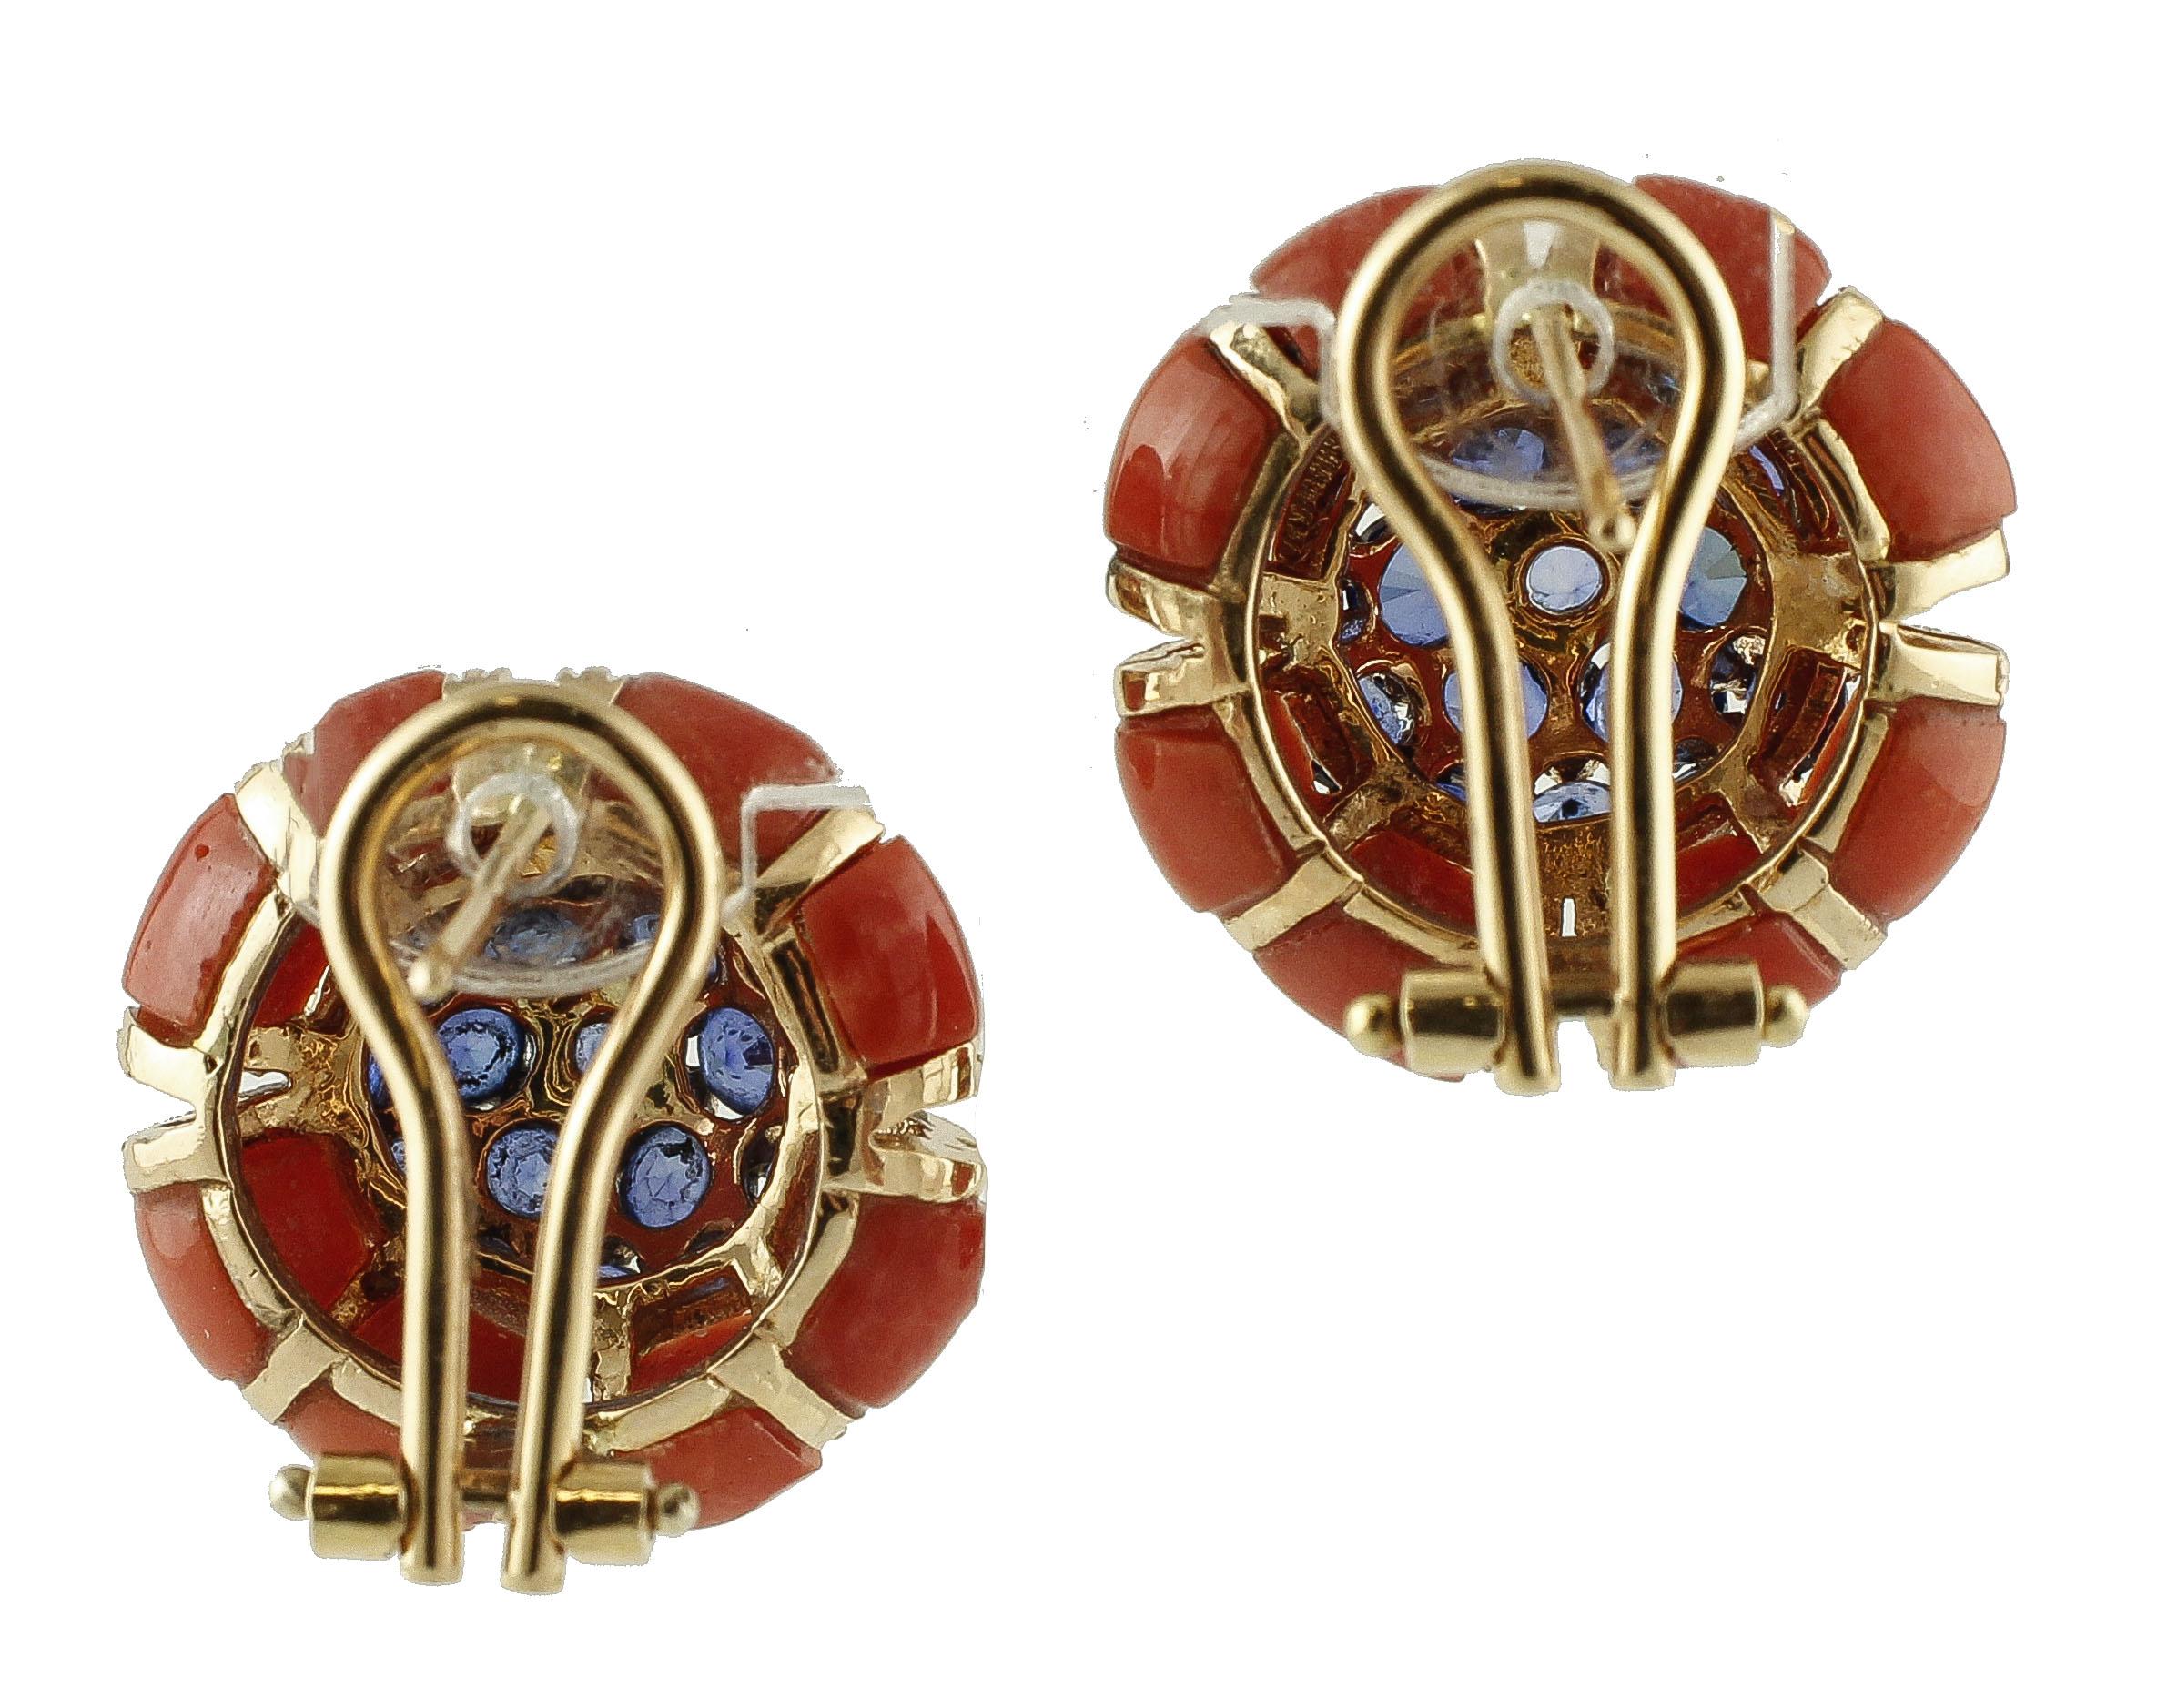 Faboulus pair of earrings realized in 14k rose gold structure. These earrings feature a central core studded with blue sapphires a round frame of beautiful red rubrum coral. The earrings are embellished with details in rose gold and diamonds. 
These